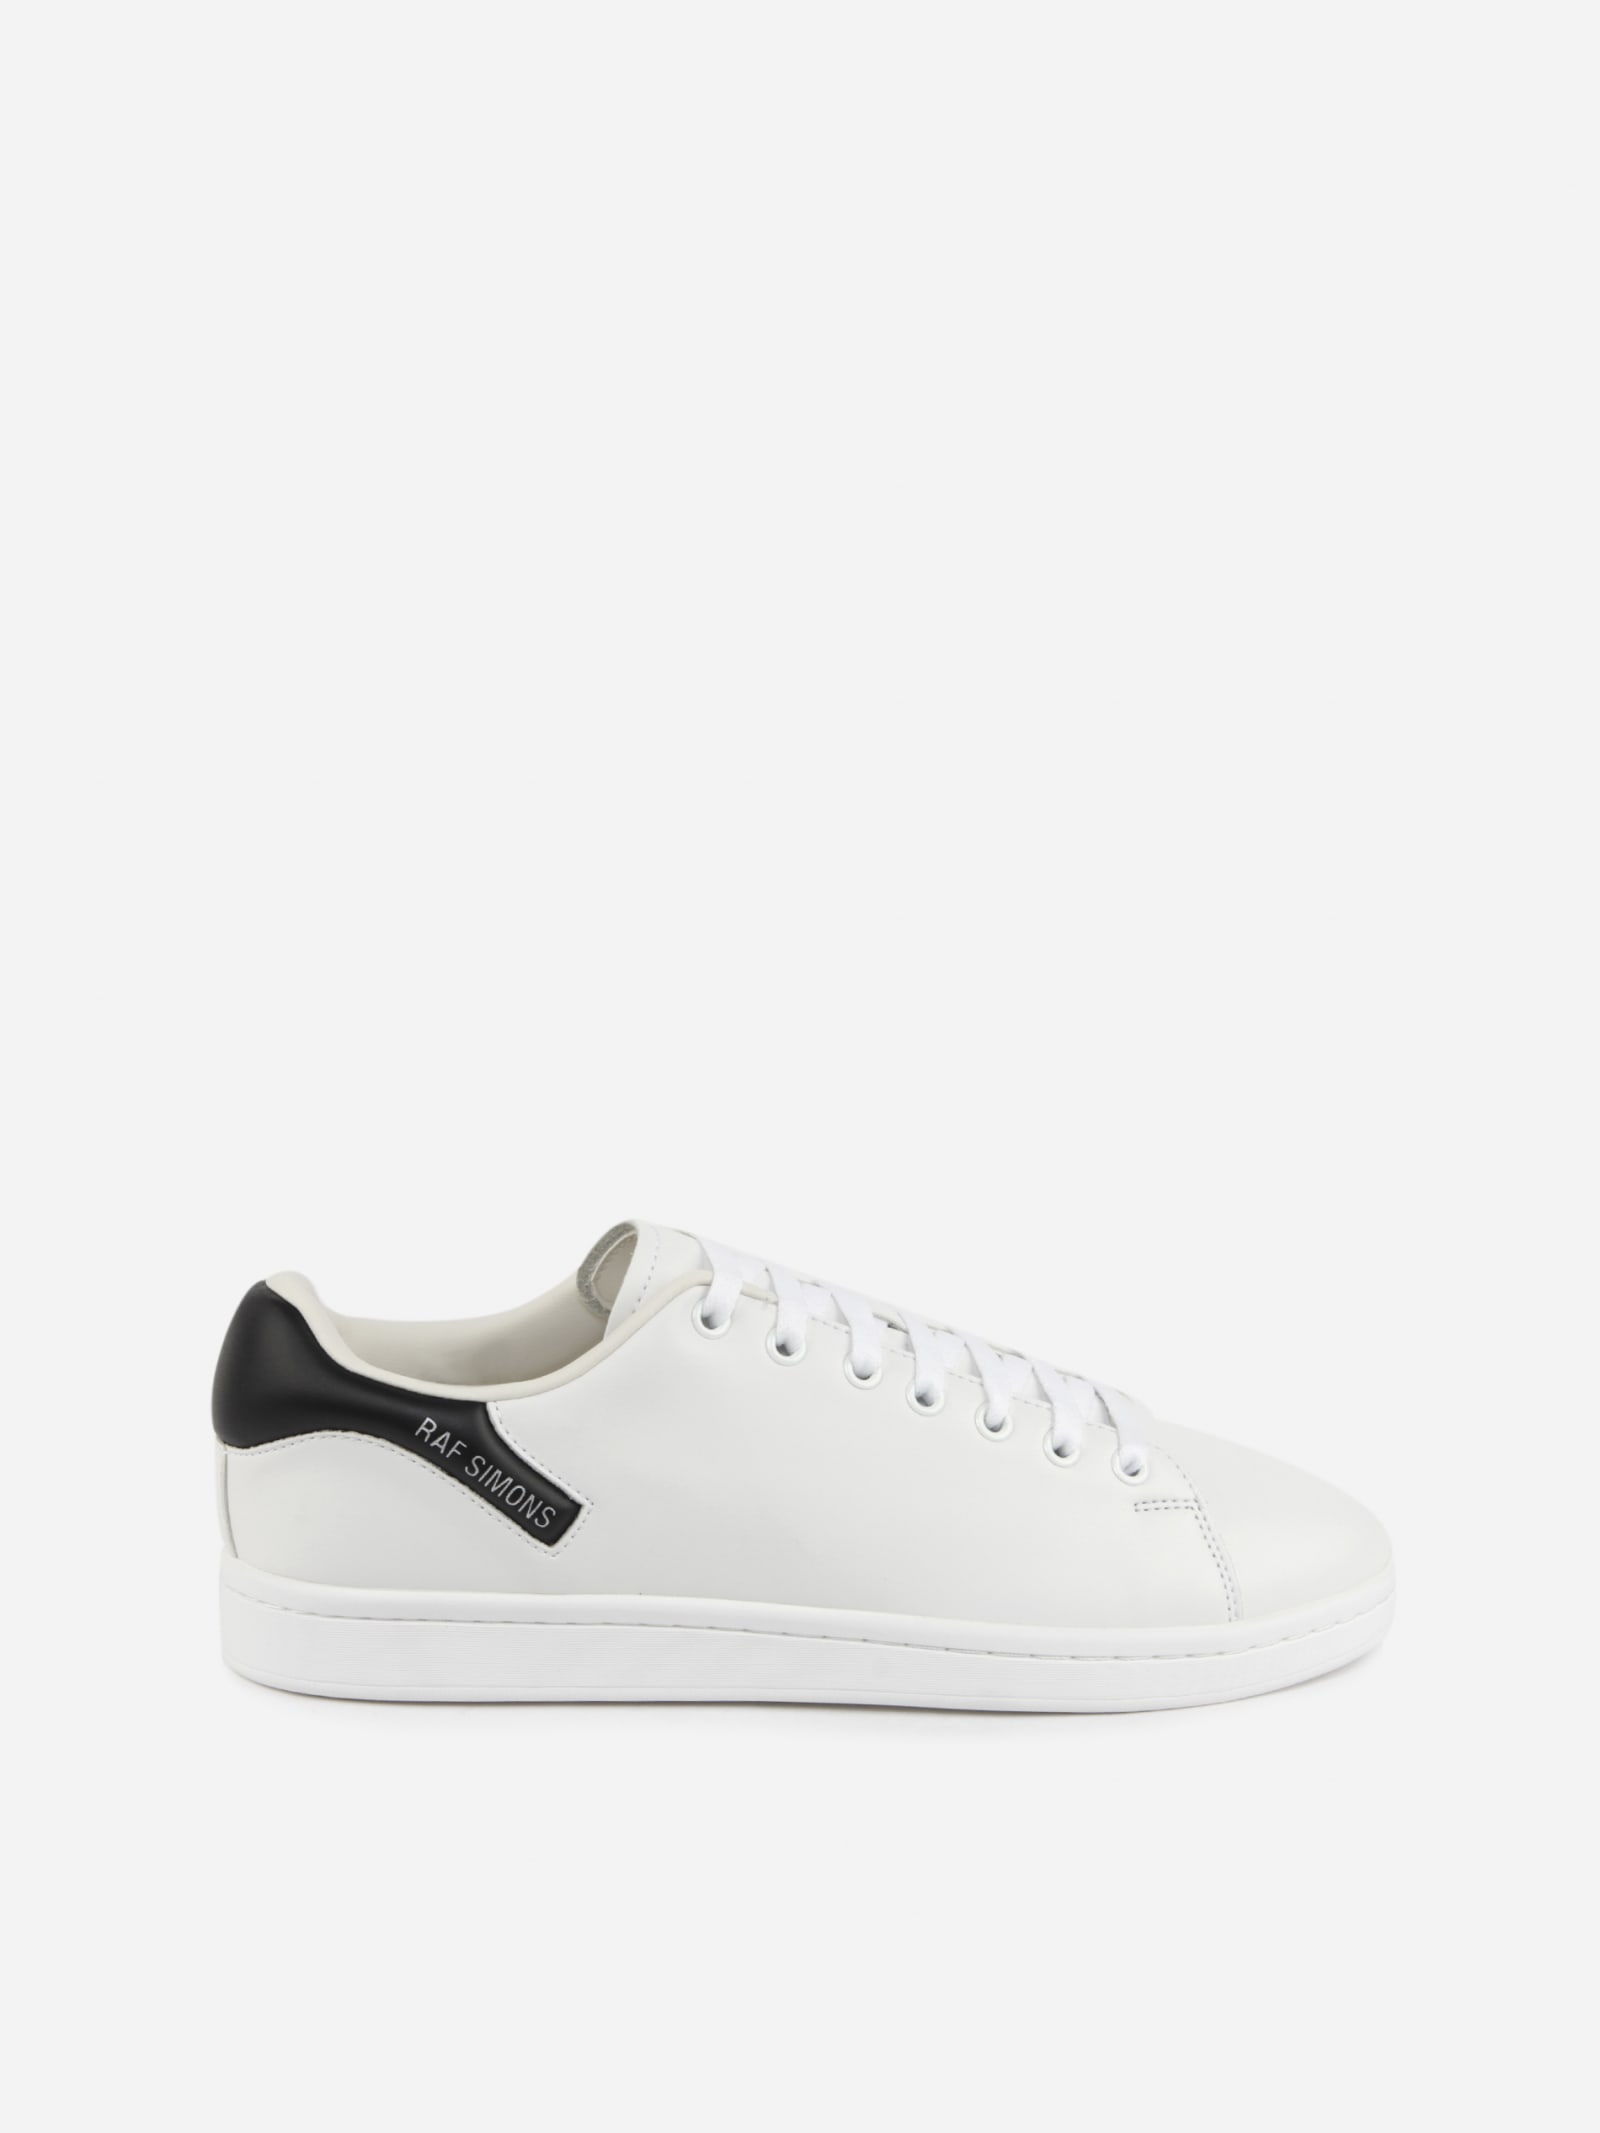 Raf Simons Orion Sneakers With Contrasting Heel Tab